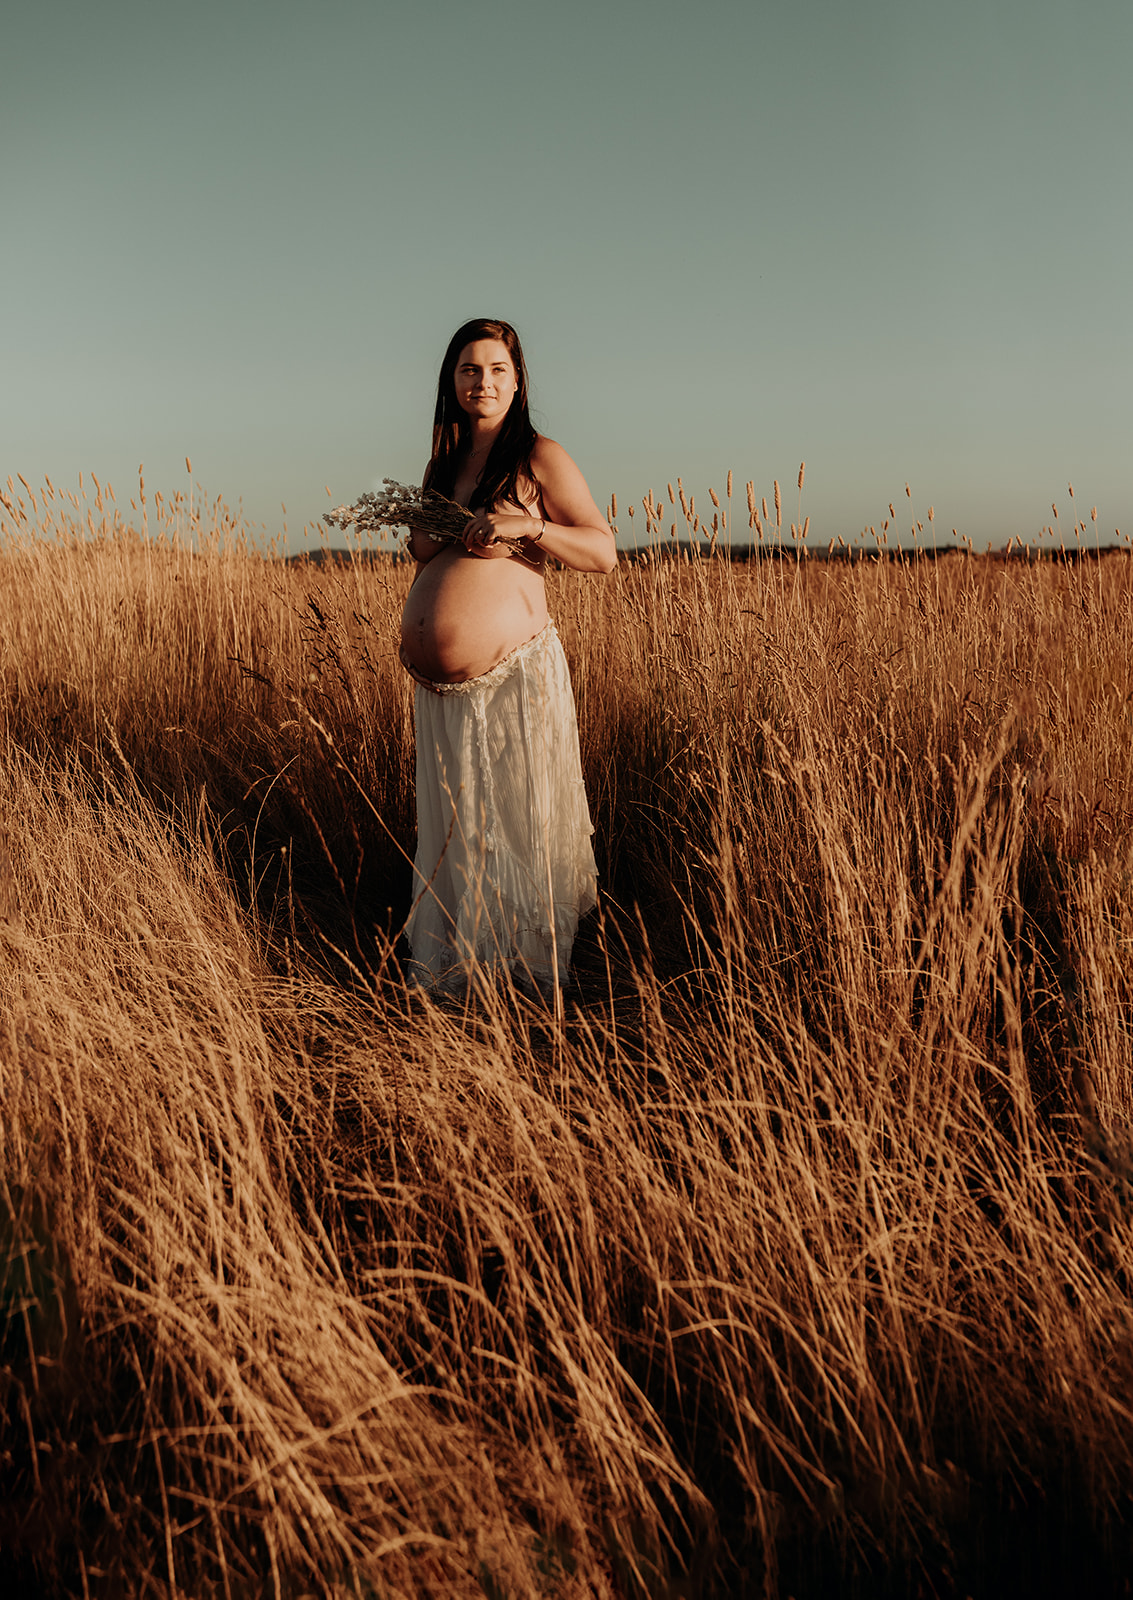 A heavy pregnant woman holds dried daisies to her naked chest, she wears a long white skirt and stands in a grass field.